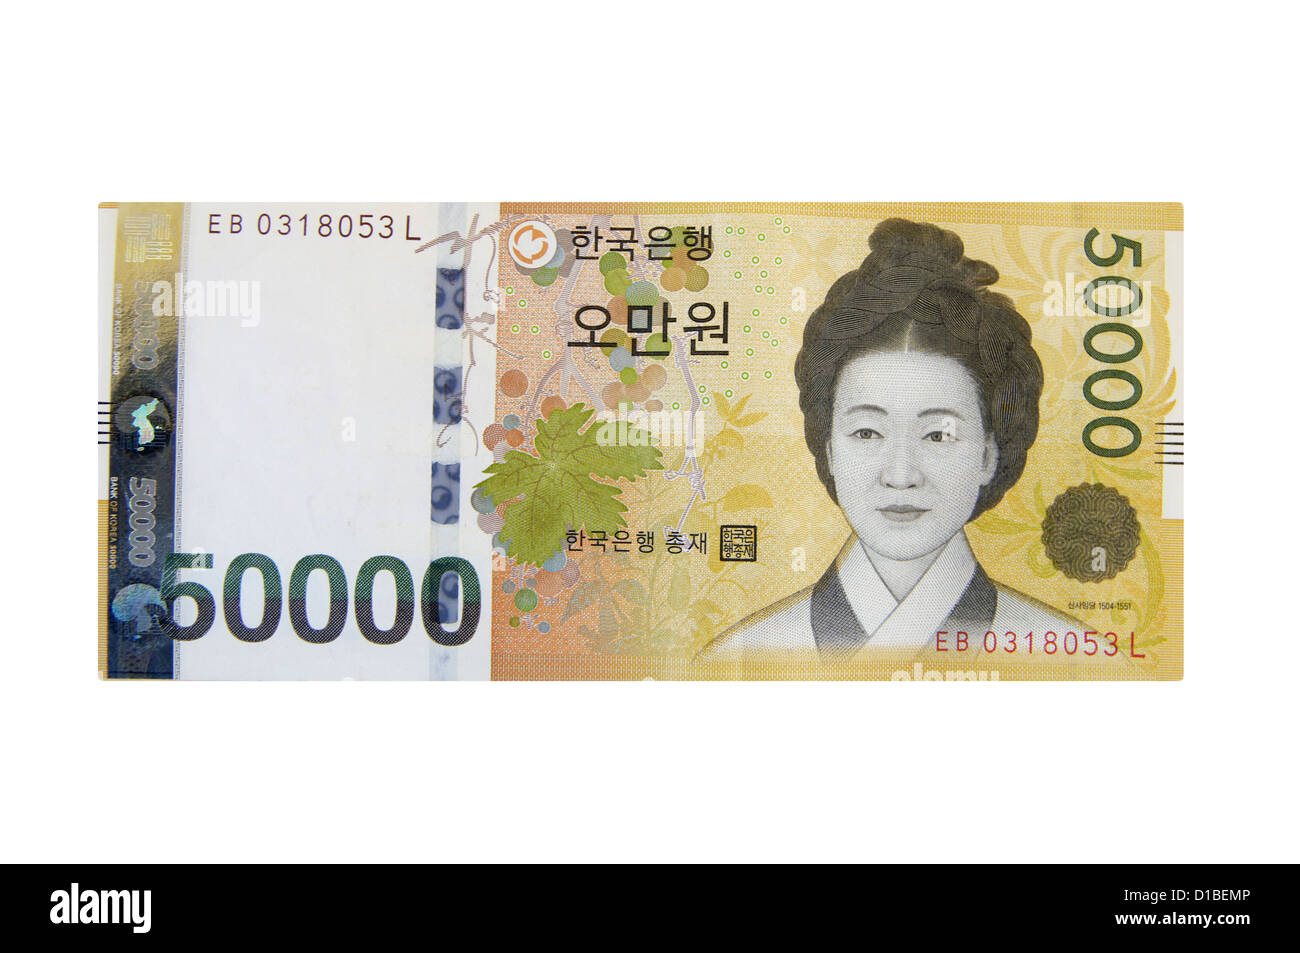 50,000 won South Korean Bills (about $50) isolated Stock Photo